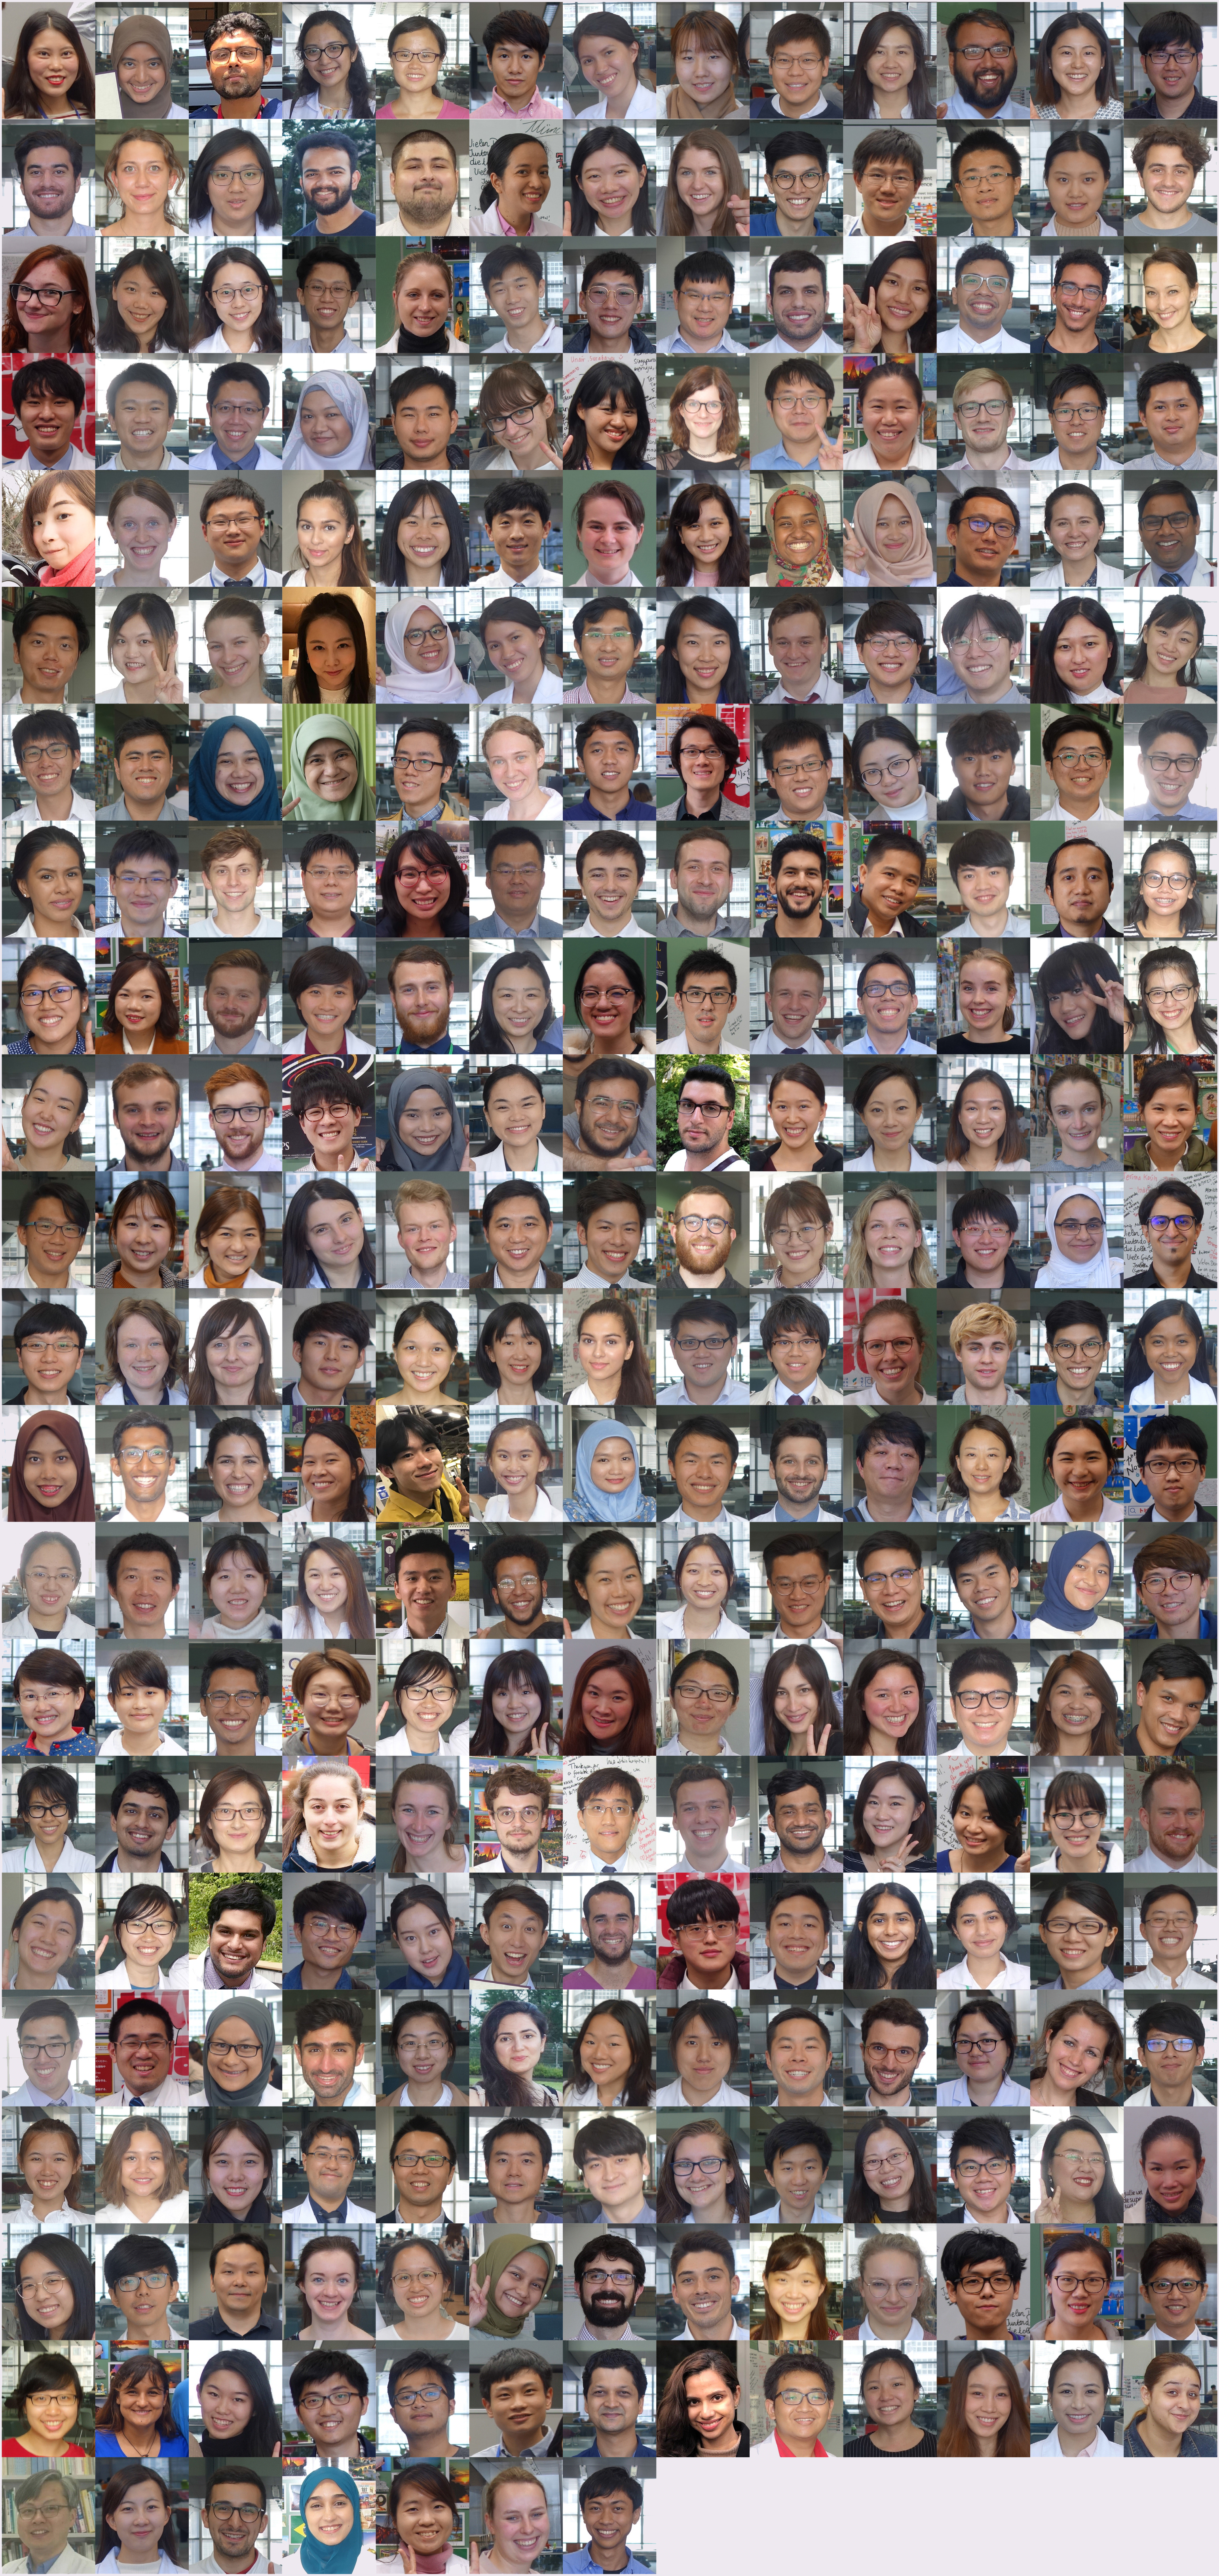 Clinical Observers Collage 2018